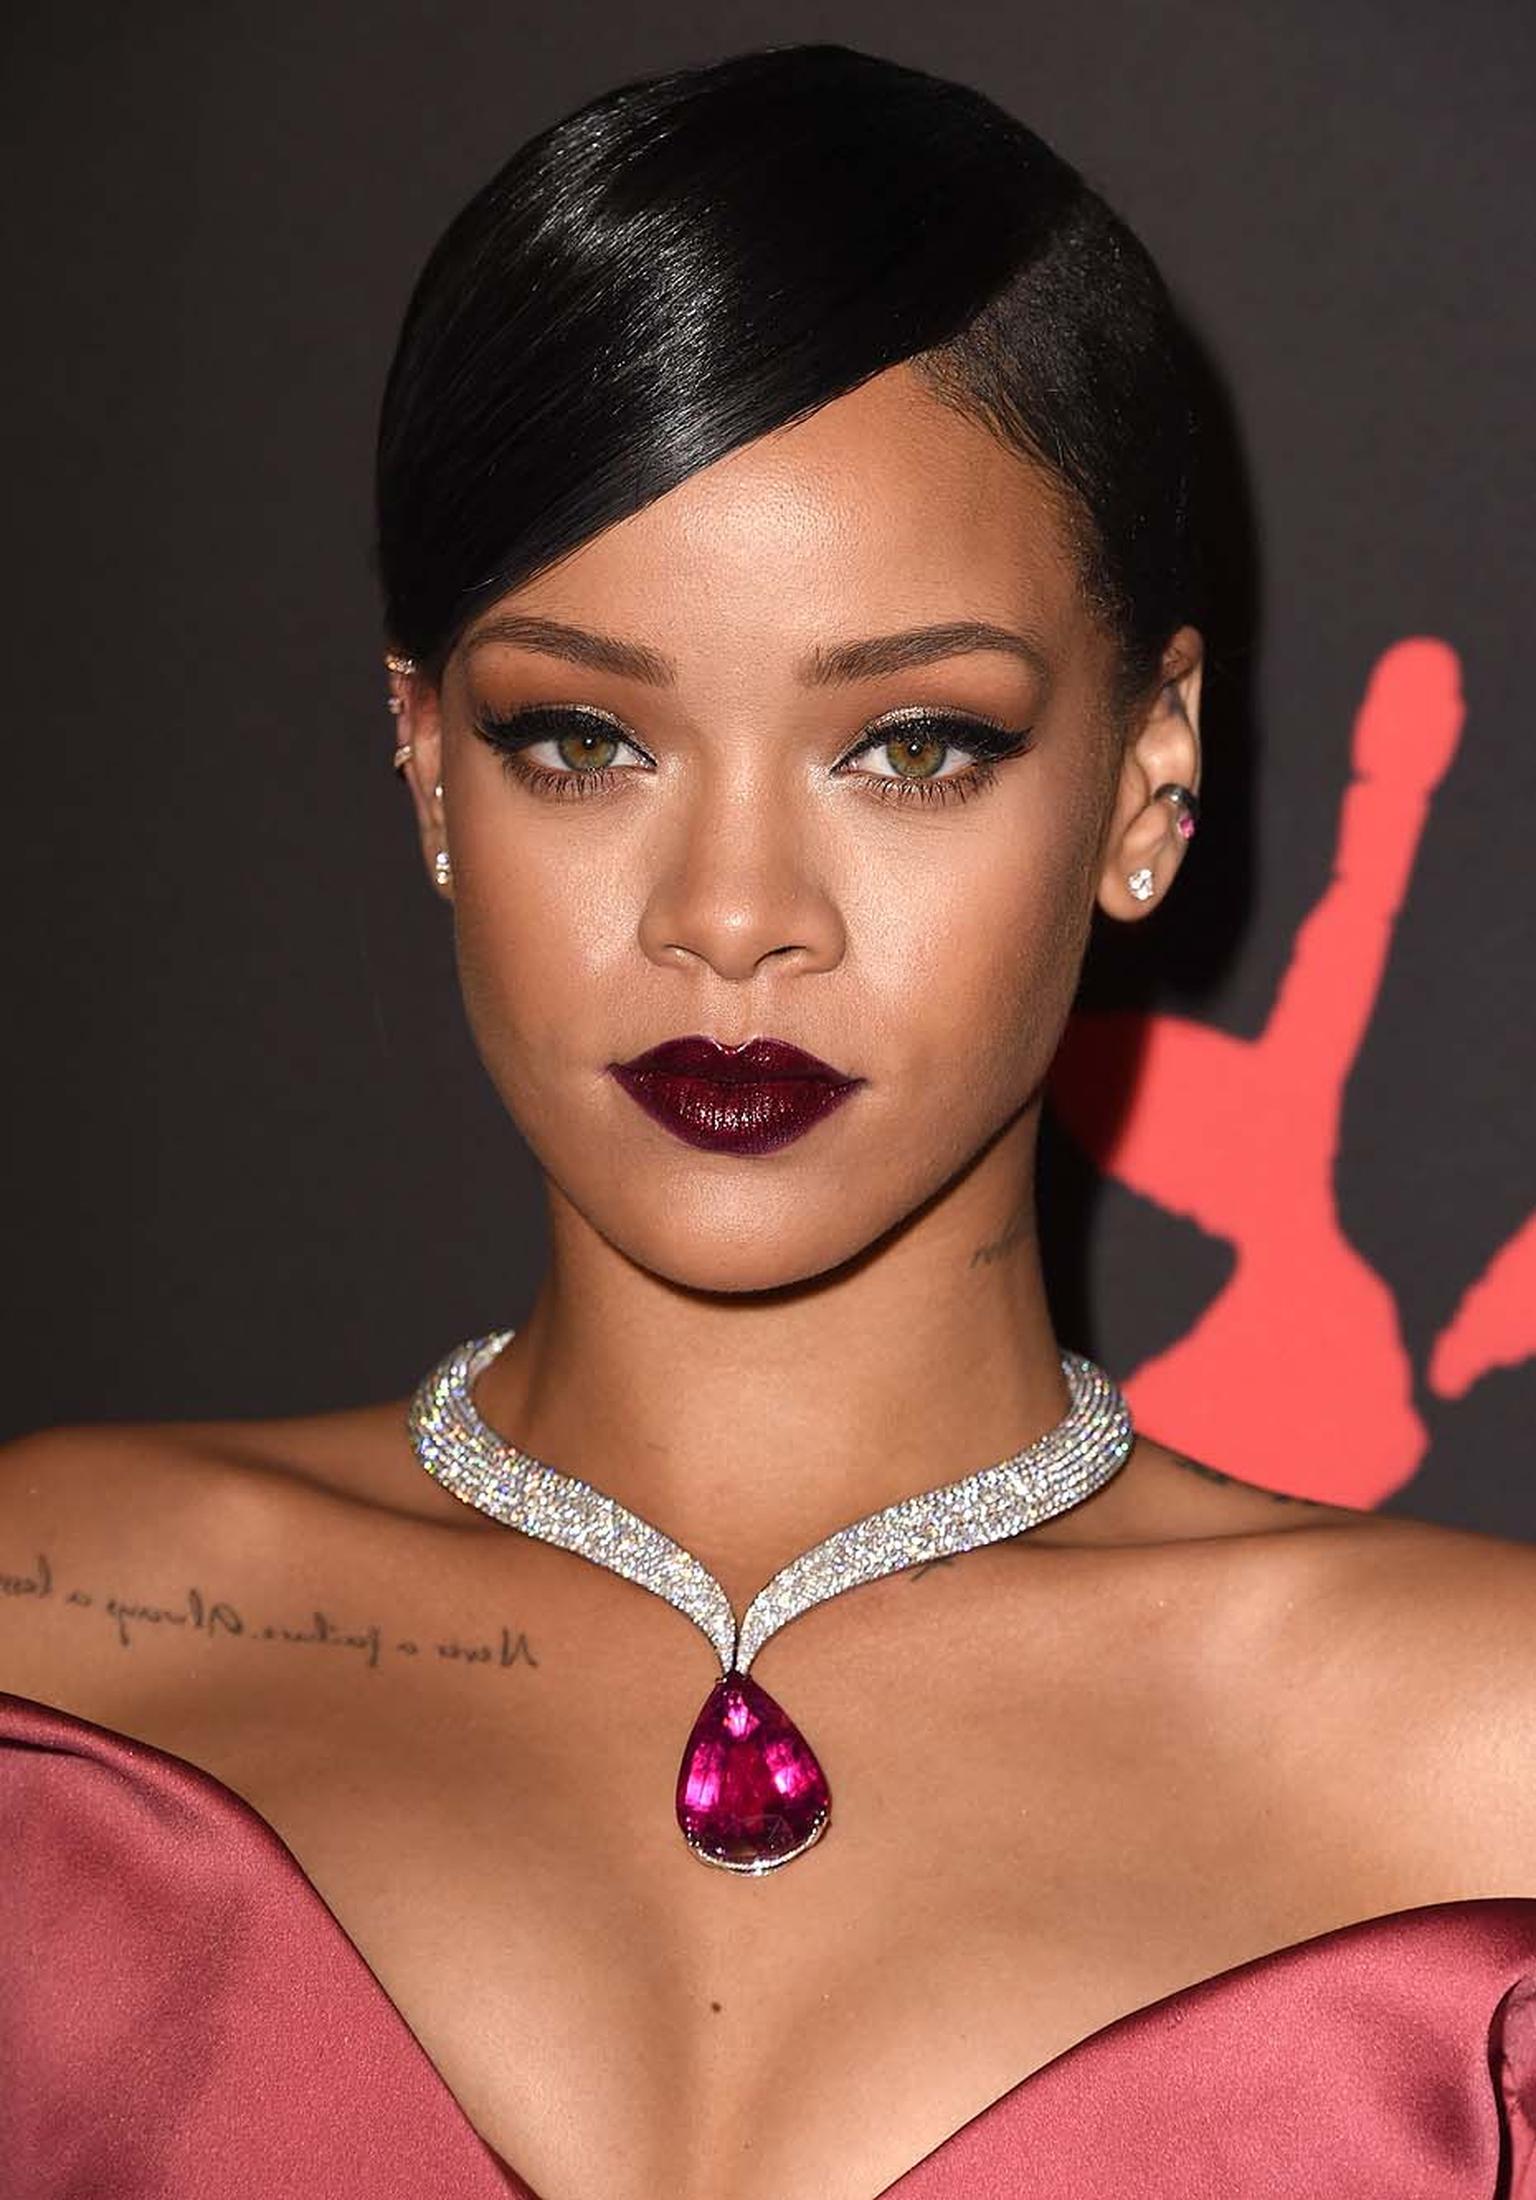 Perching just above Rihanna's racy décolleté, the curvaceous singer flaunted a bright pink rubellite and diamond Chopard necklace.